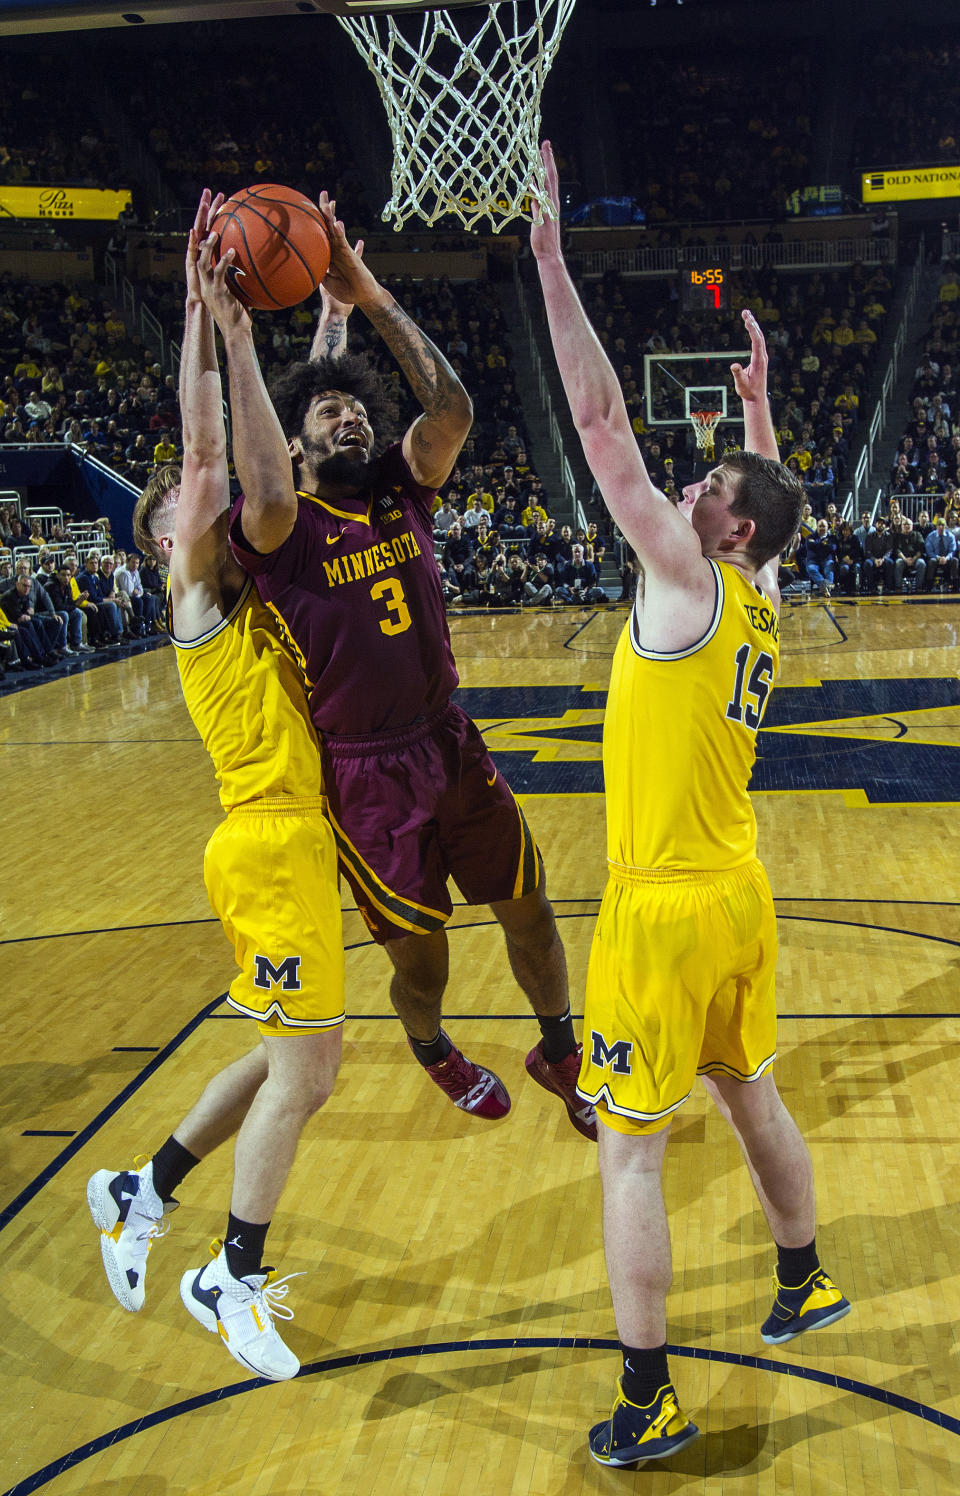 Minnesota forward Jordan Murphy (3) tries to make a basket, defended by Michigan forward Ignas Brazdeikis, left, and center Jon Teske (15), in the second half of an NCAA college basketball game at Crisler Center in Ann Arbor, Mich., Tuesday, Jan. 22, 2019. Michigan won 59-57. (AP Photo/Tony Ding)